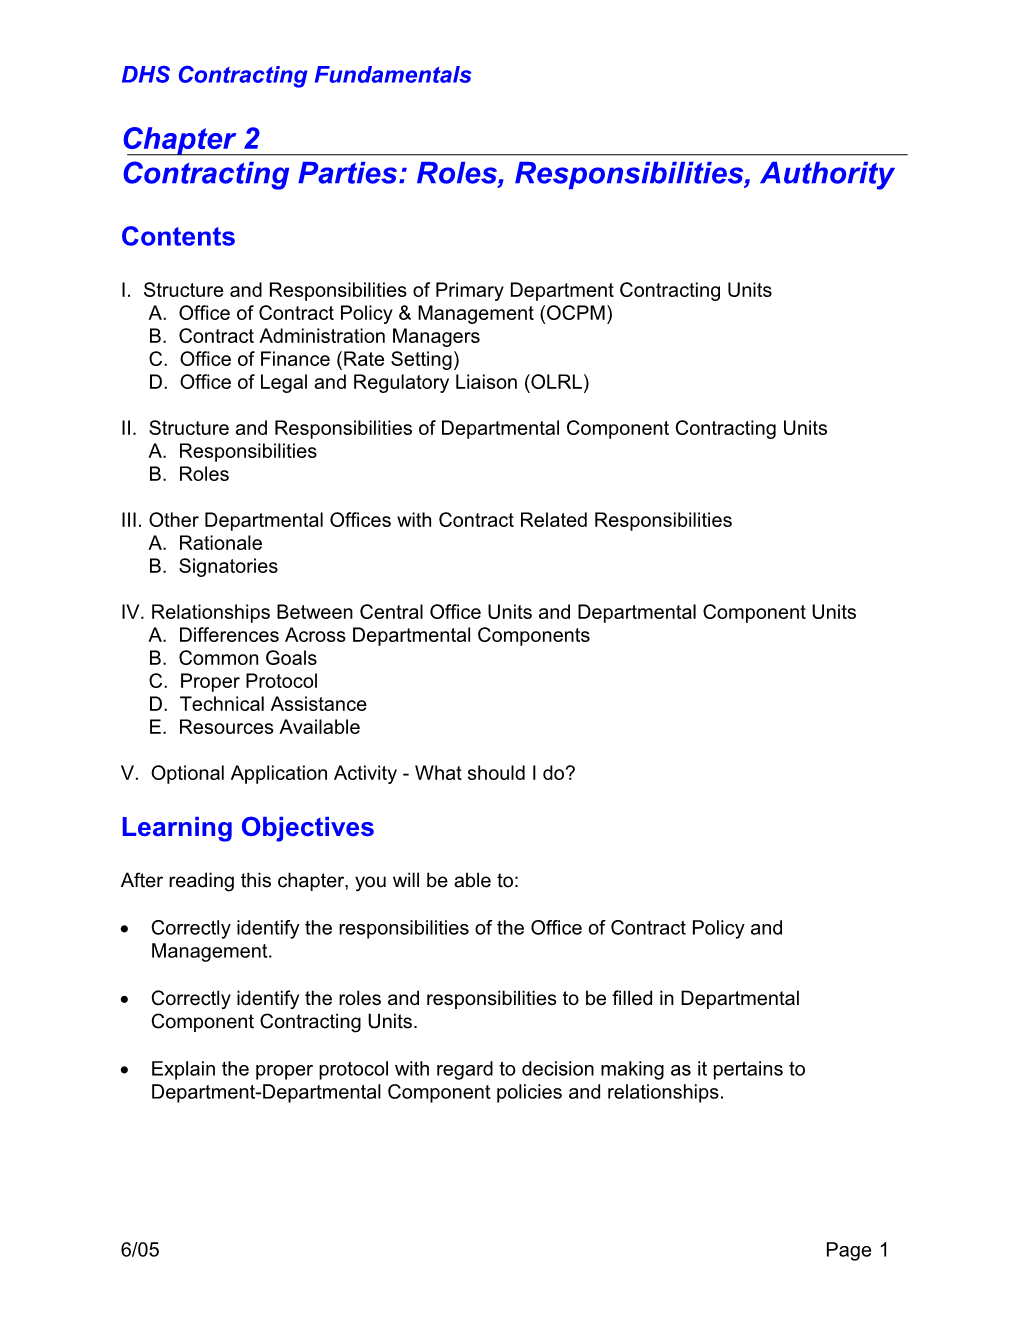 I. Structure and Responsibilities of Primary Department Contracting Units